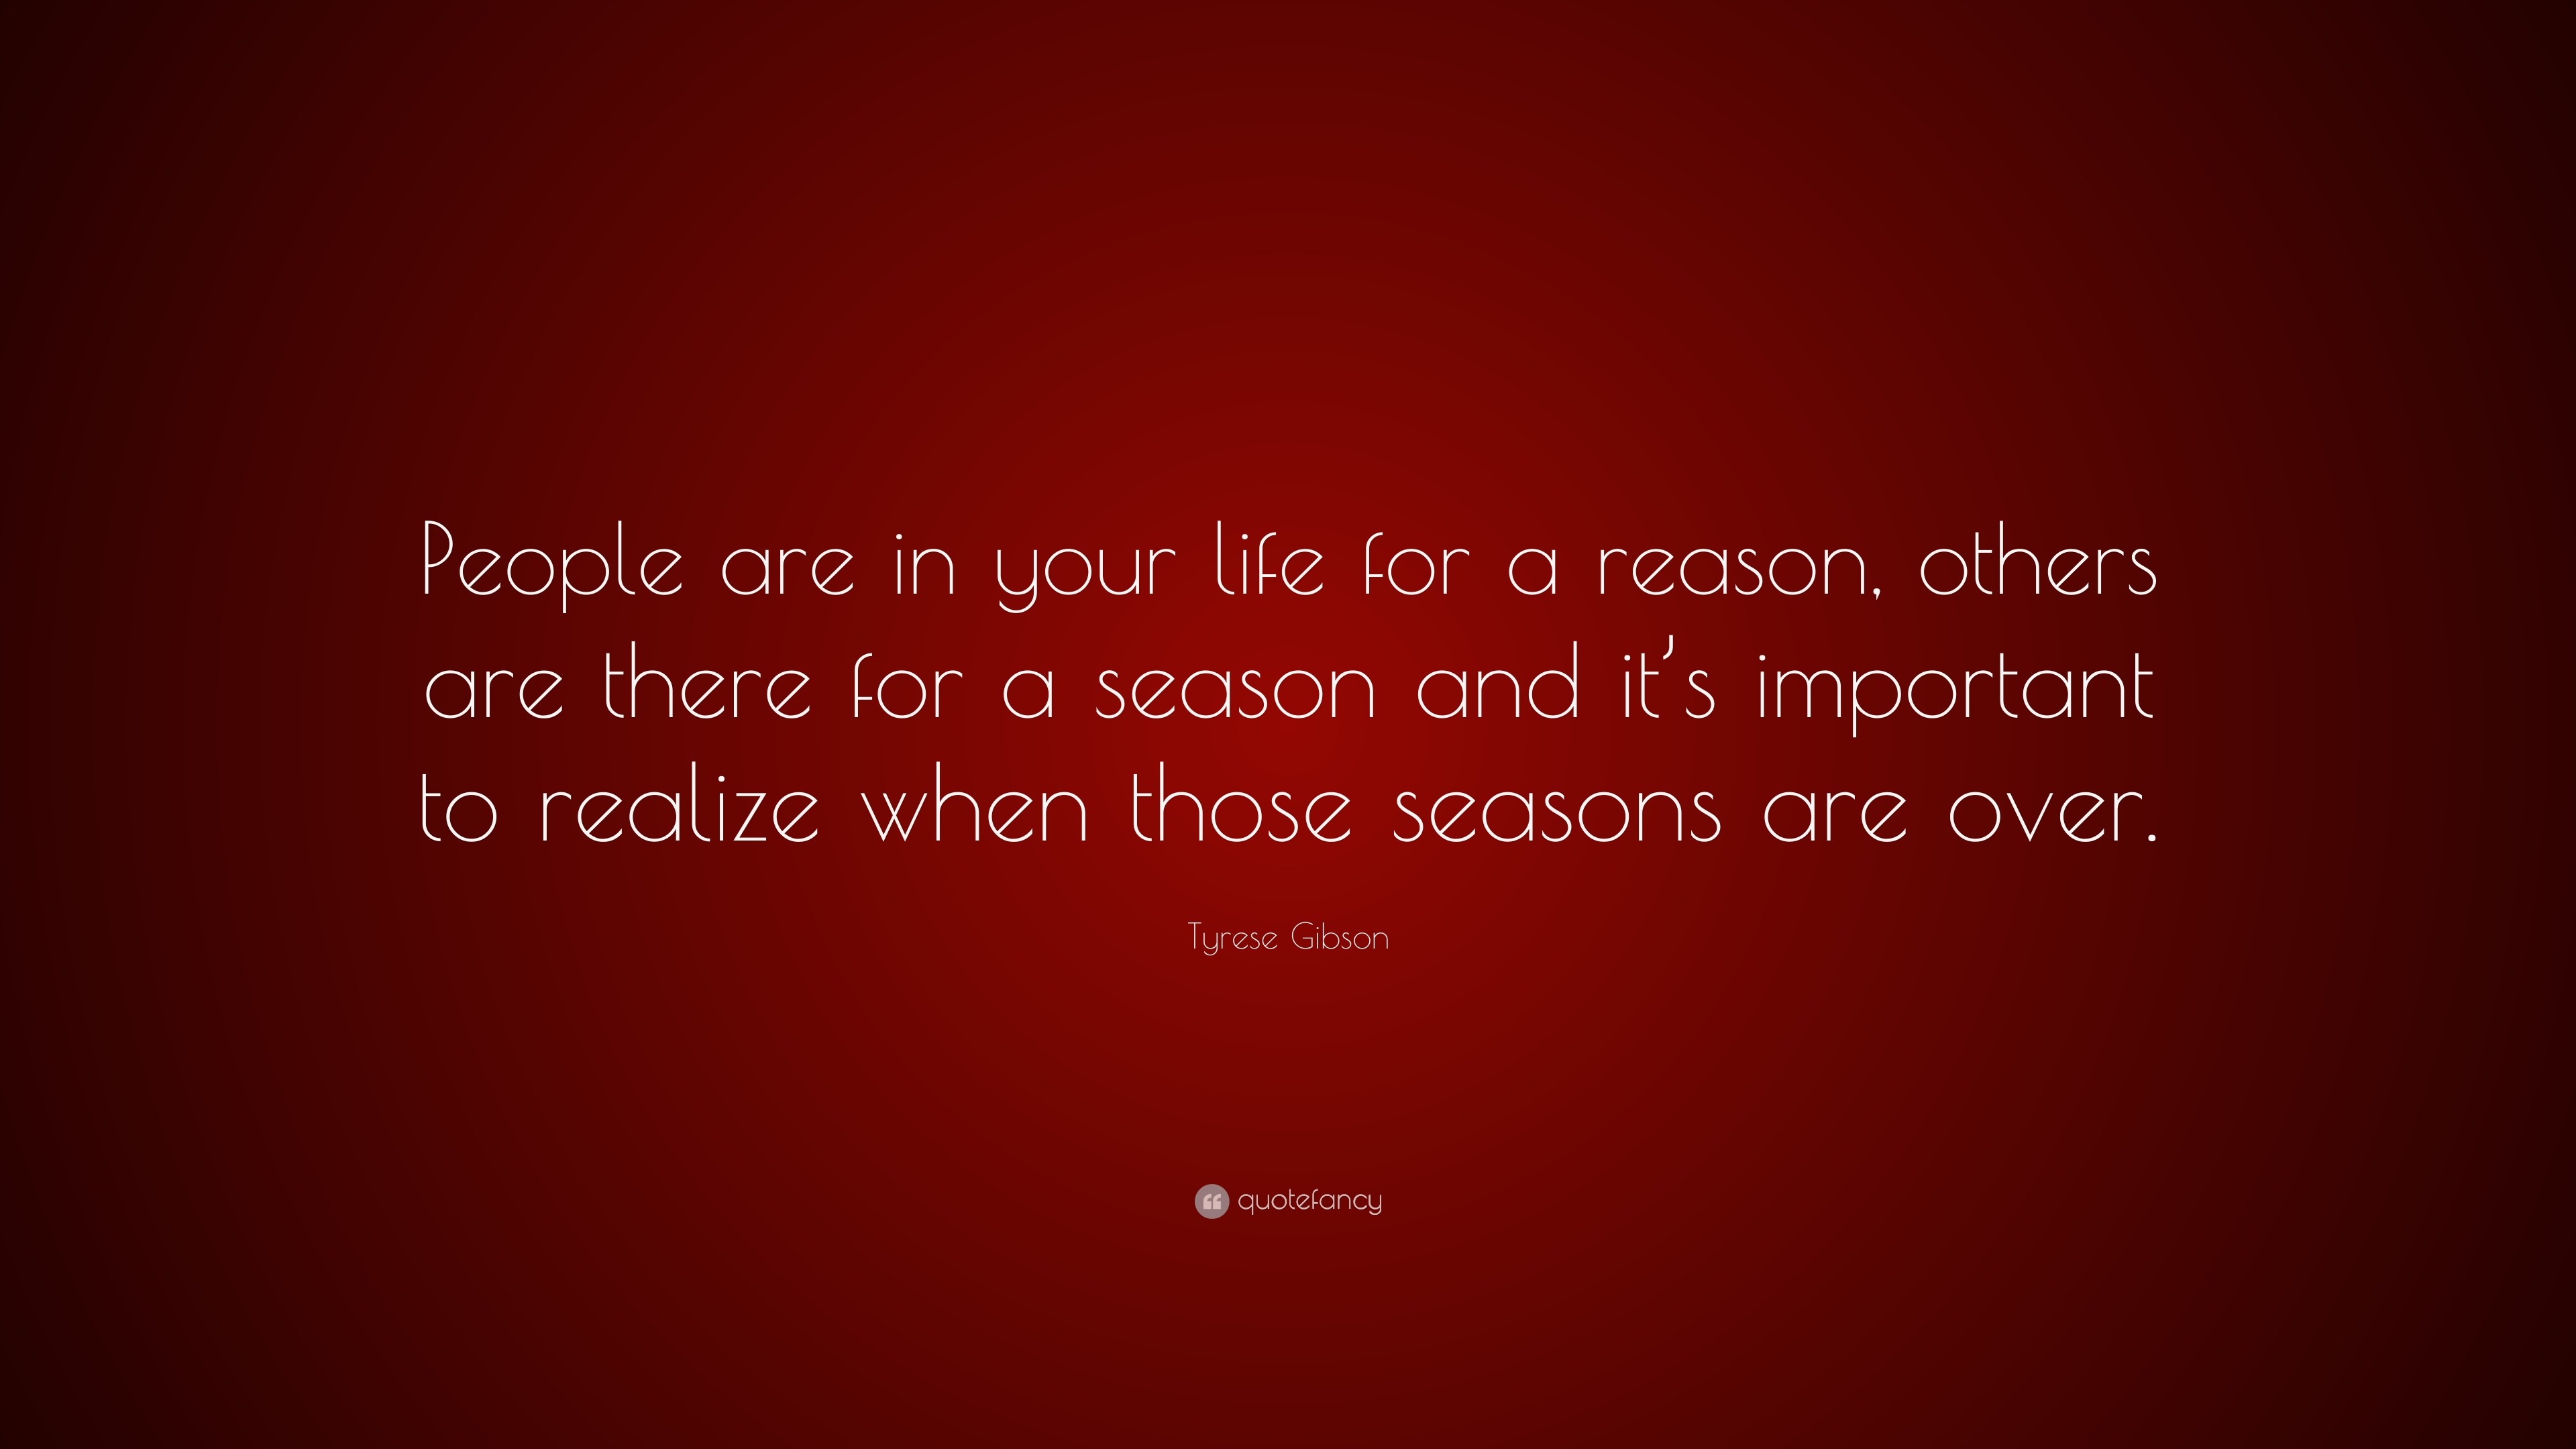 Tyrese Gibson Quote “People are in your life for a reason others are